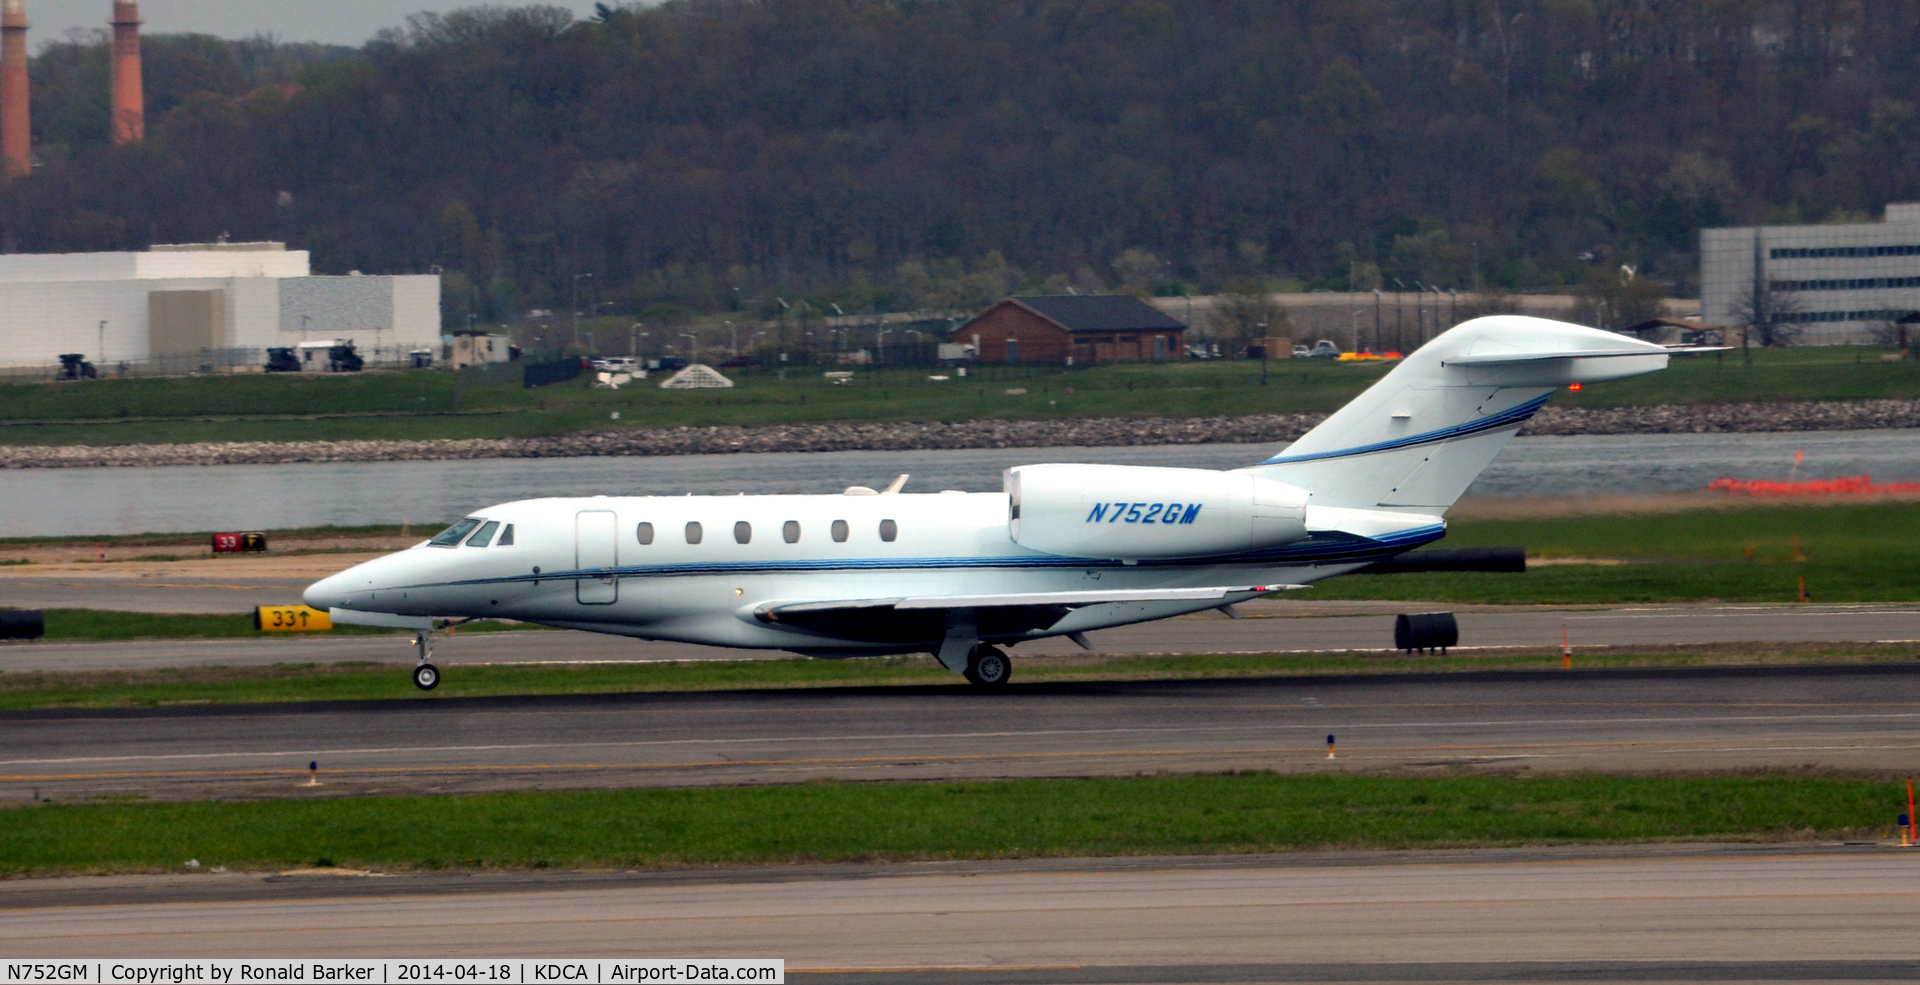 N752GM, 2007 Cessna 750 Citation X C/N 750-0276, Takeoff roll National Airport